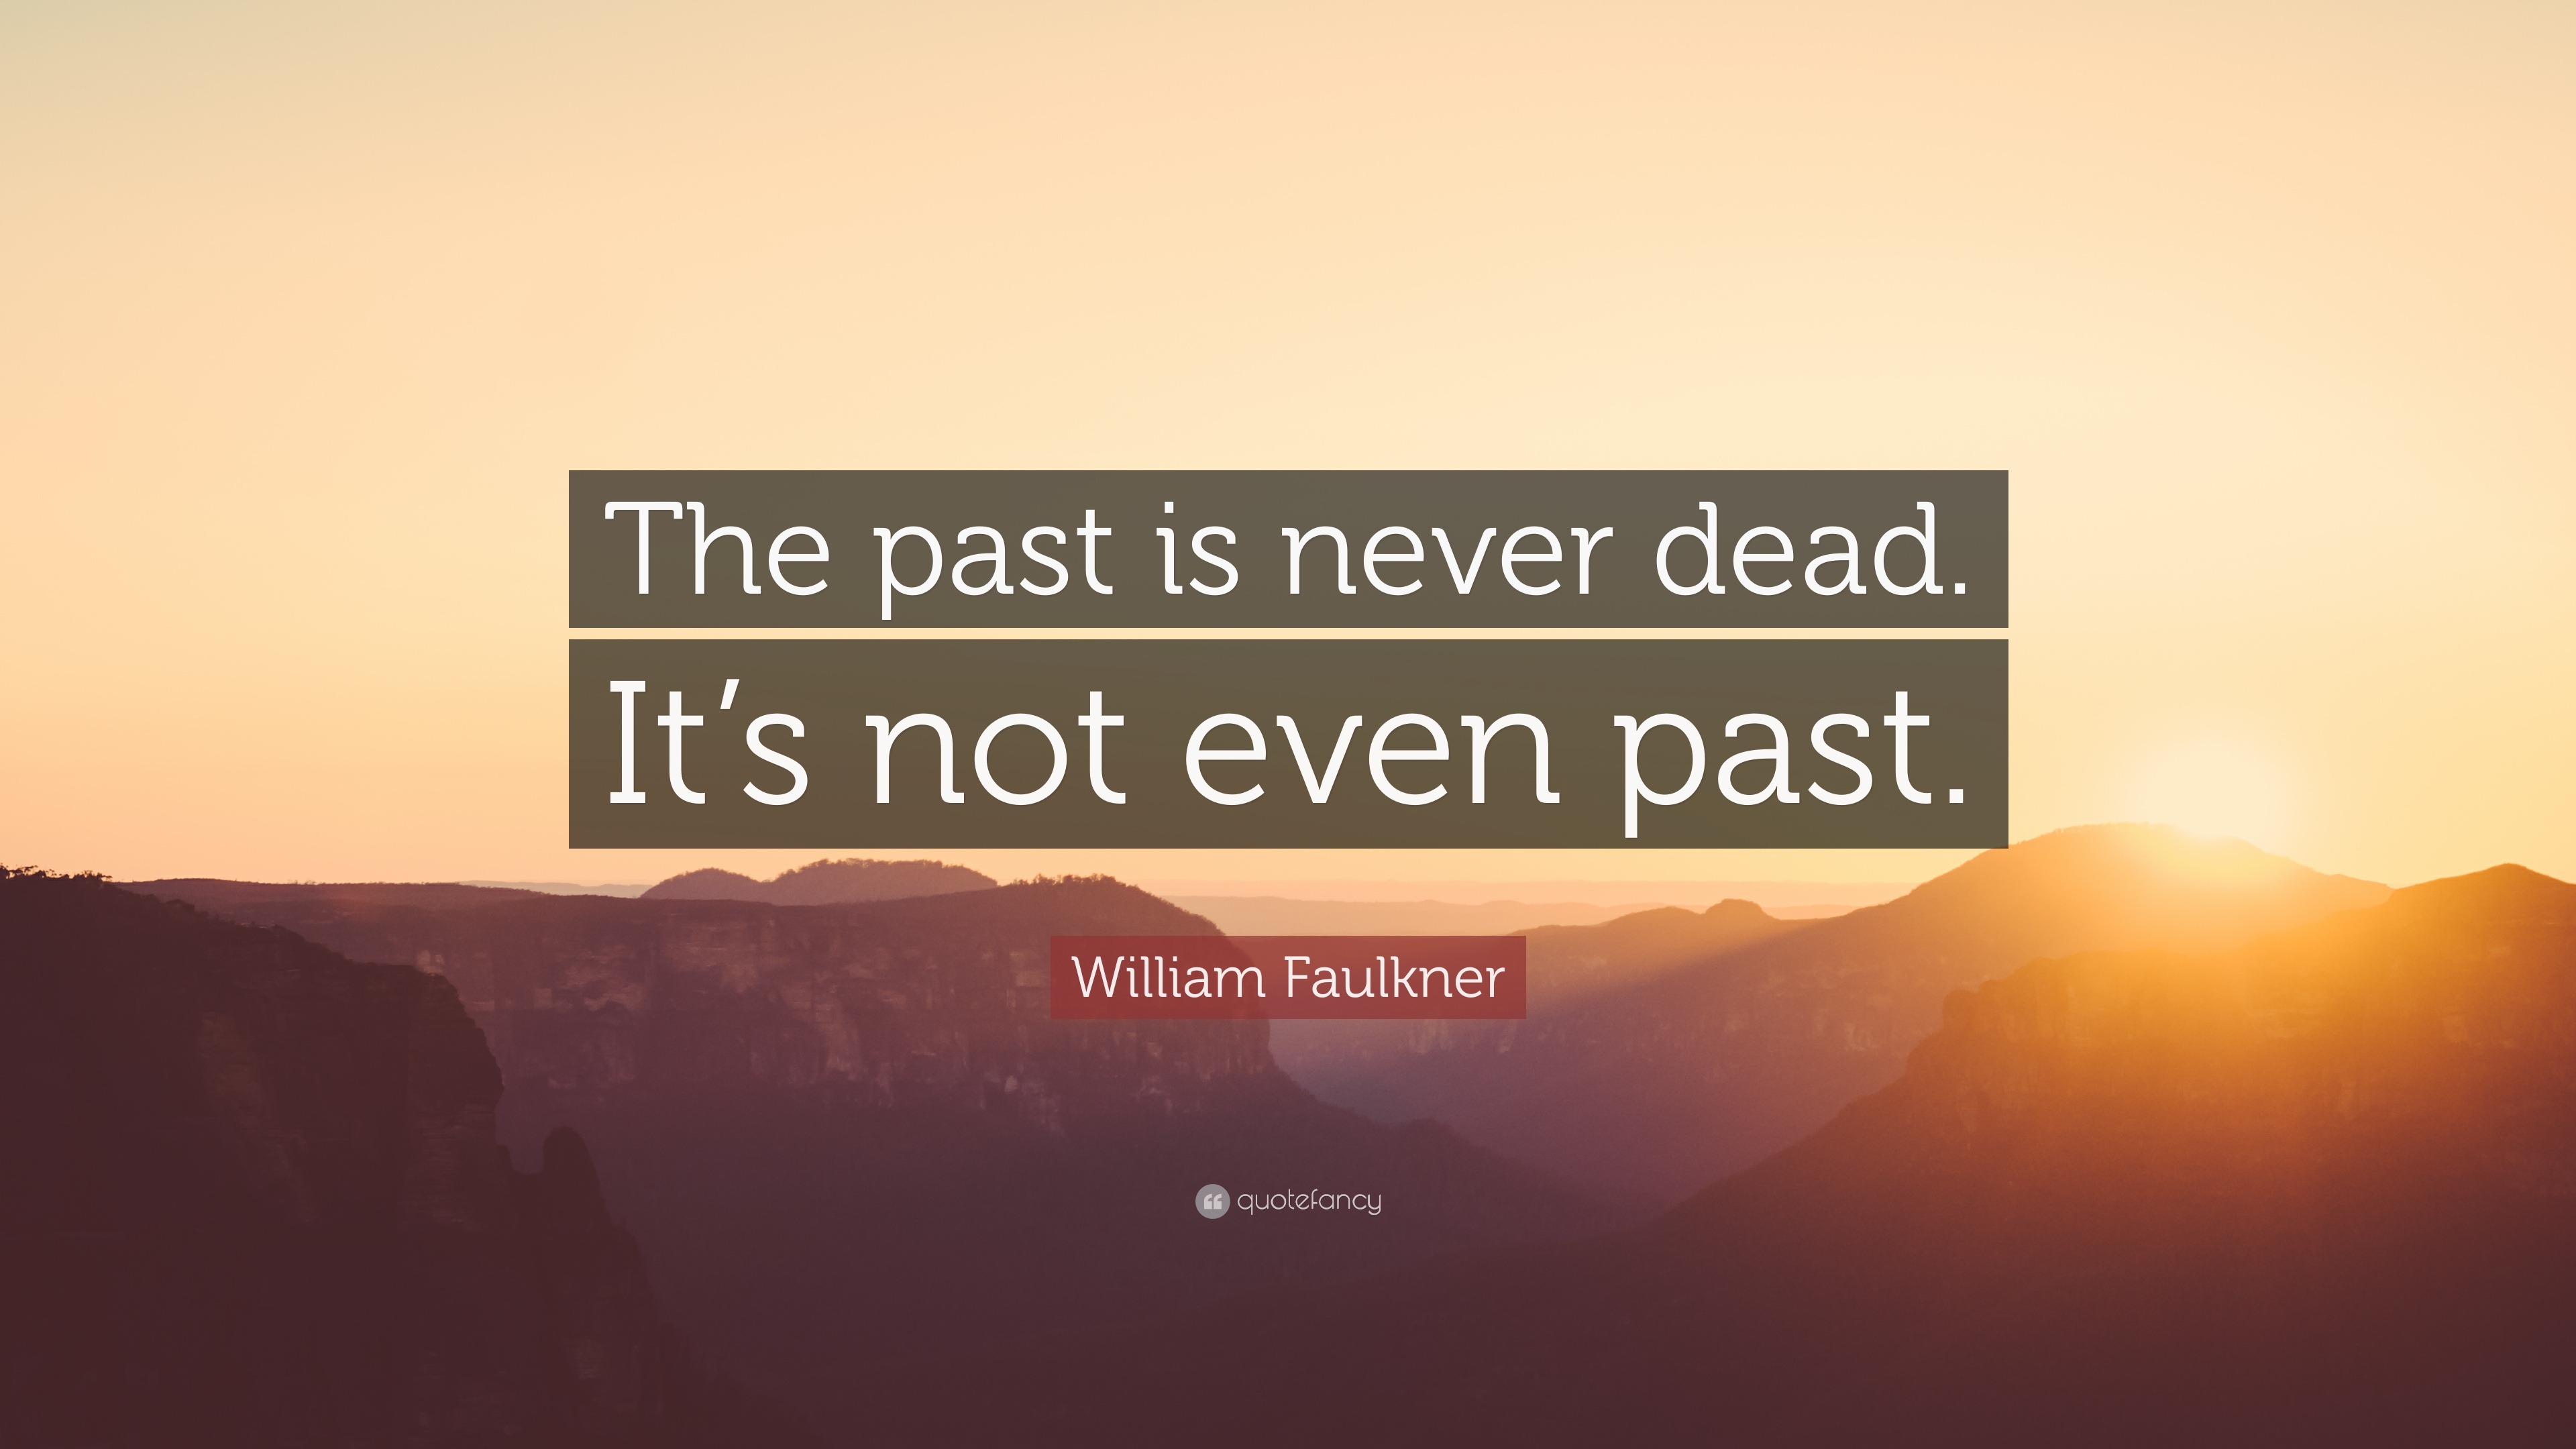 William Faulkner Quote: “The past is never dead. It&#39;s not even past.”